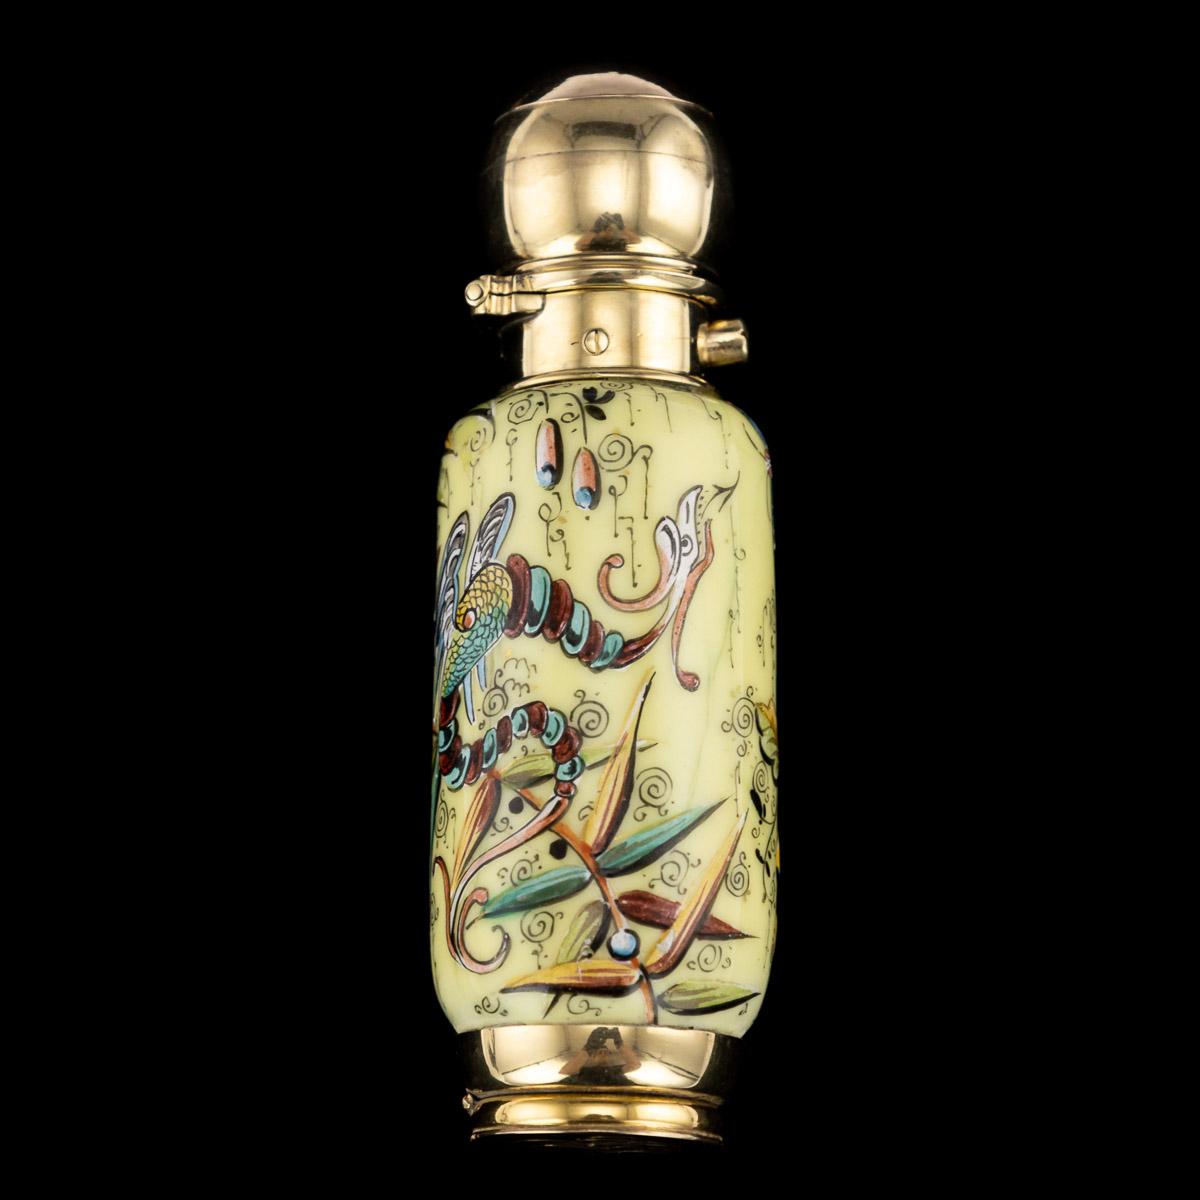 Antique 19th century Victorian 18-karat gold mounted on enamelled glass scent bottle and vinaigrette, of cylinder shape, glass body hand-painted in relief with unusual chinoiserie inspired motifs, depicting colourful birds and butterflies amongst